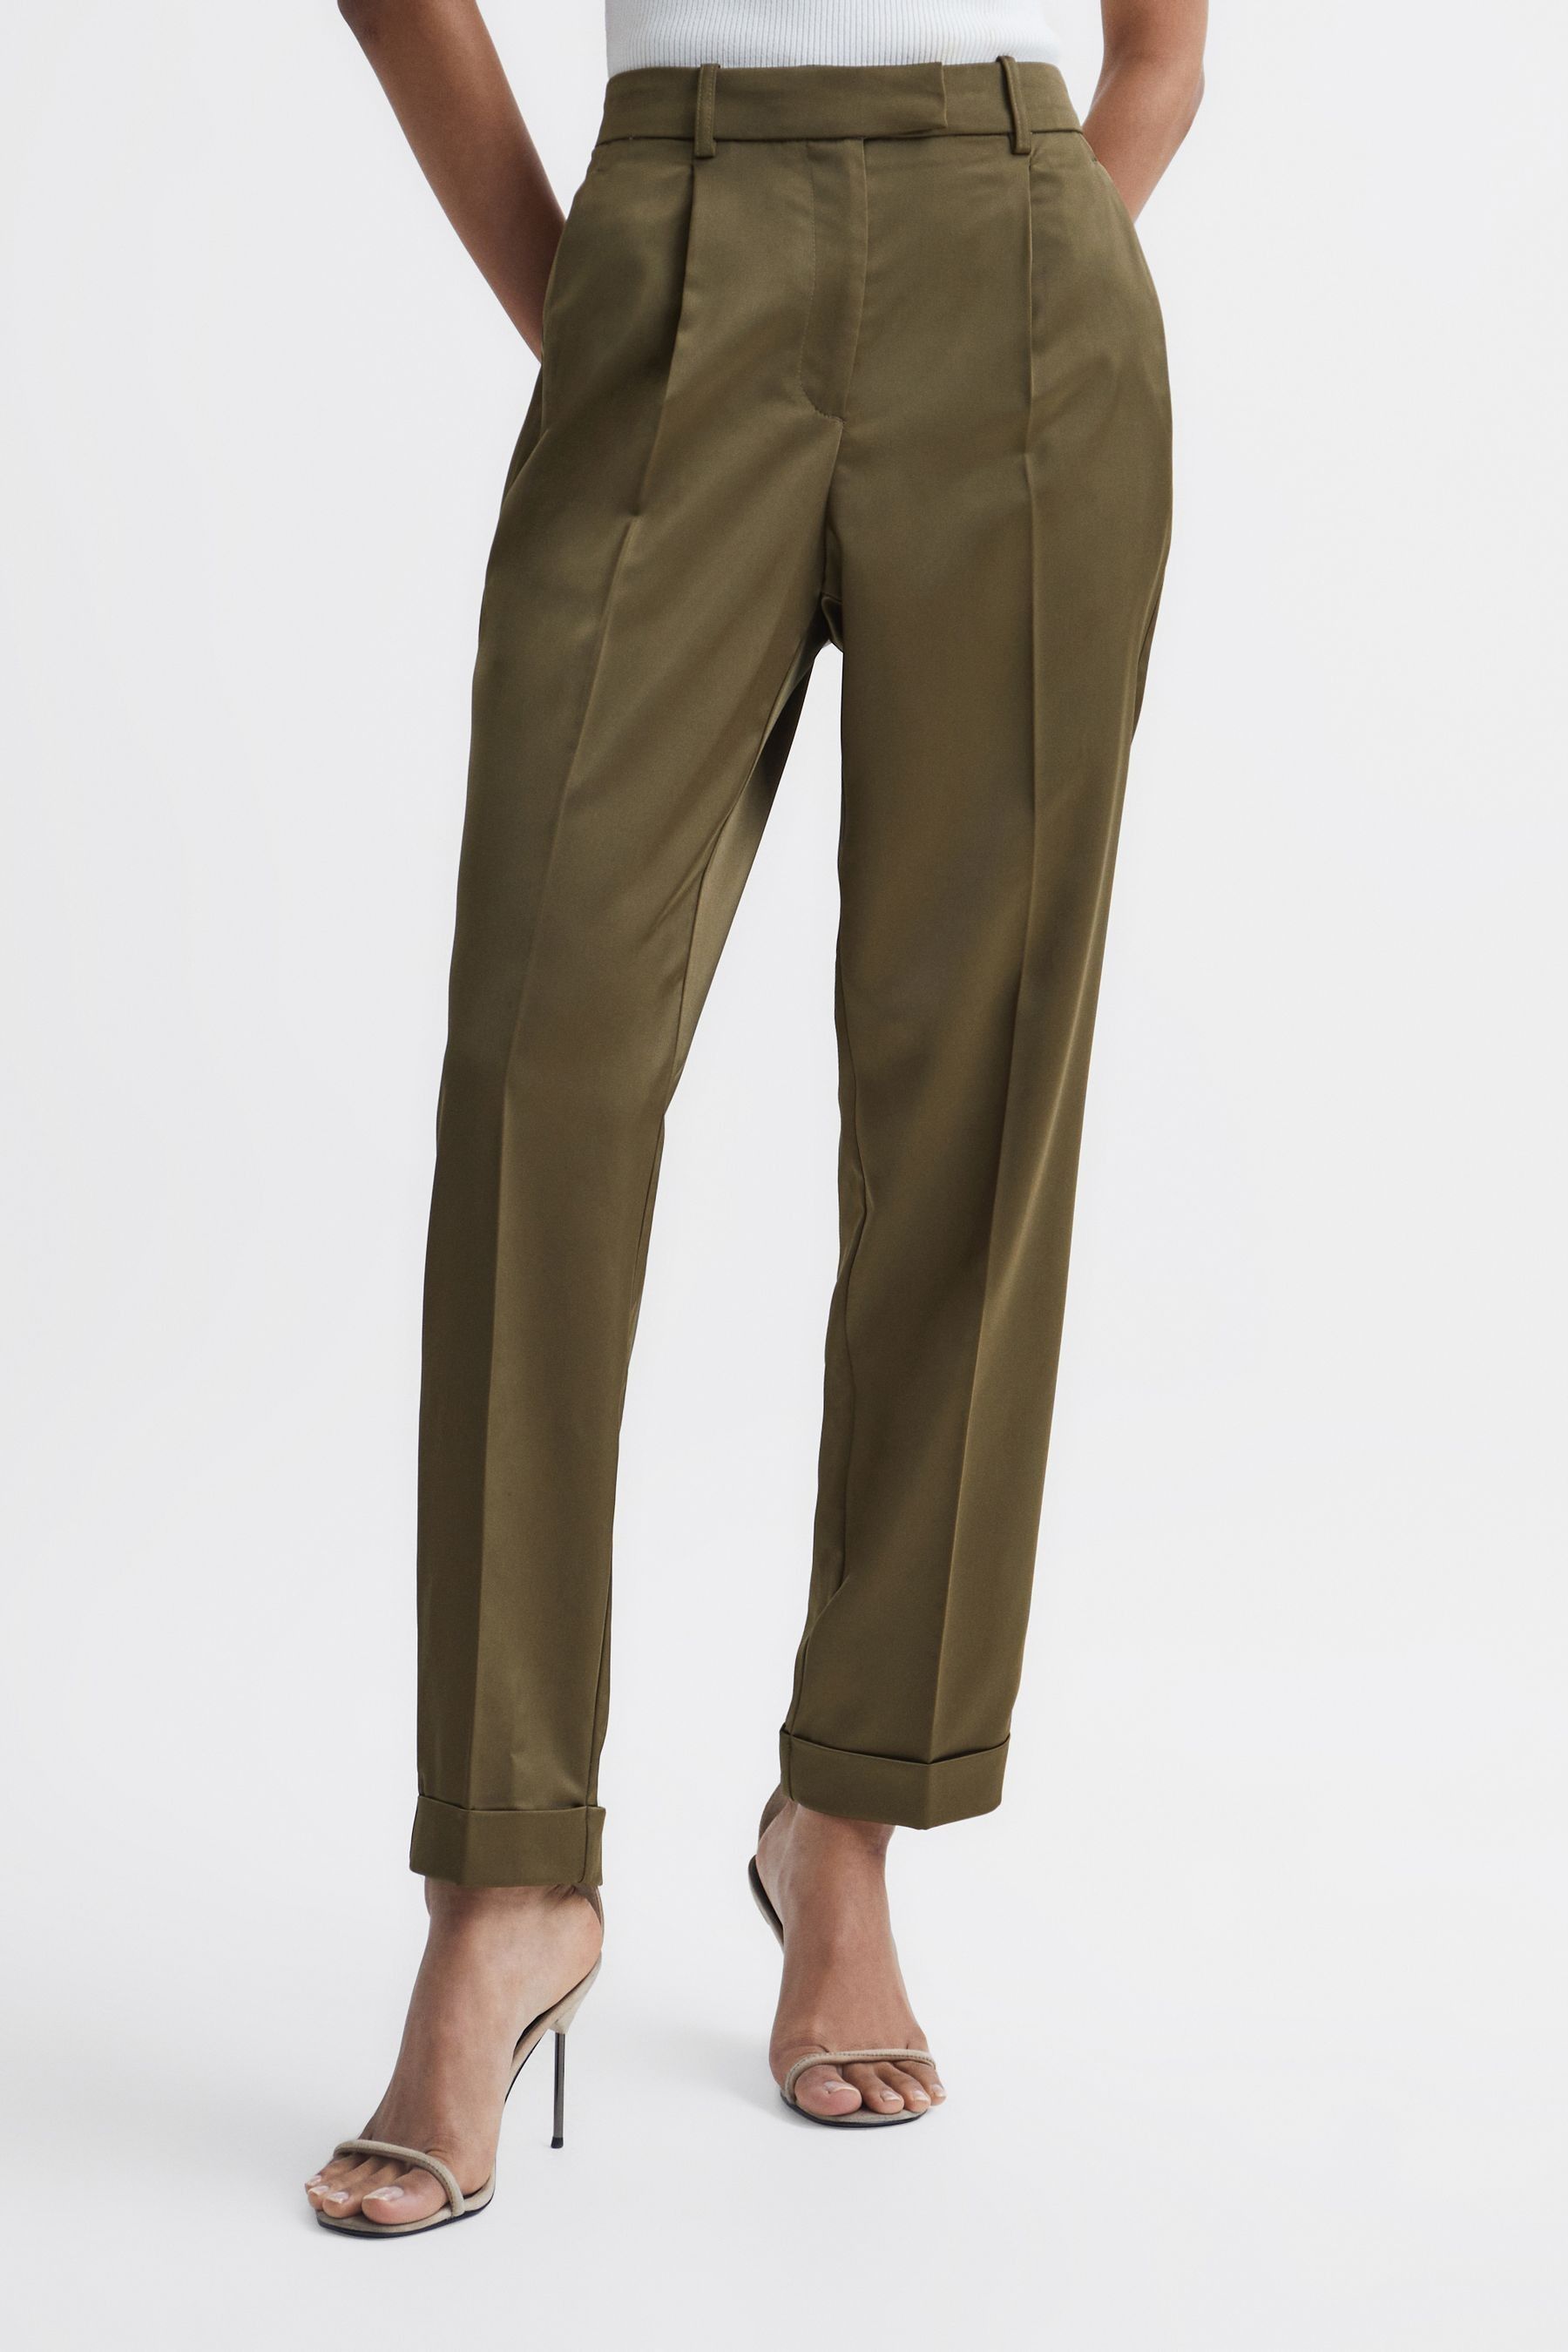 Buy Reiss Cici Satin Taper Trousers from Next Portugal